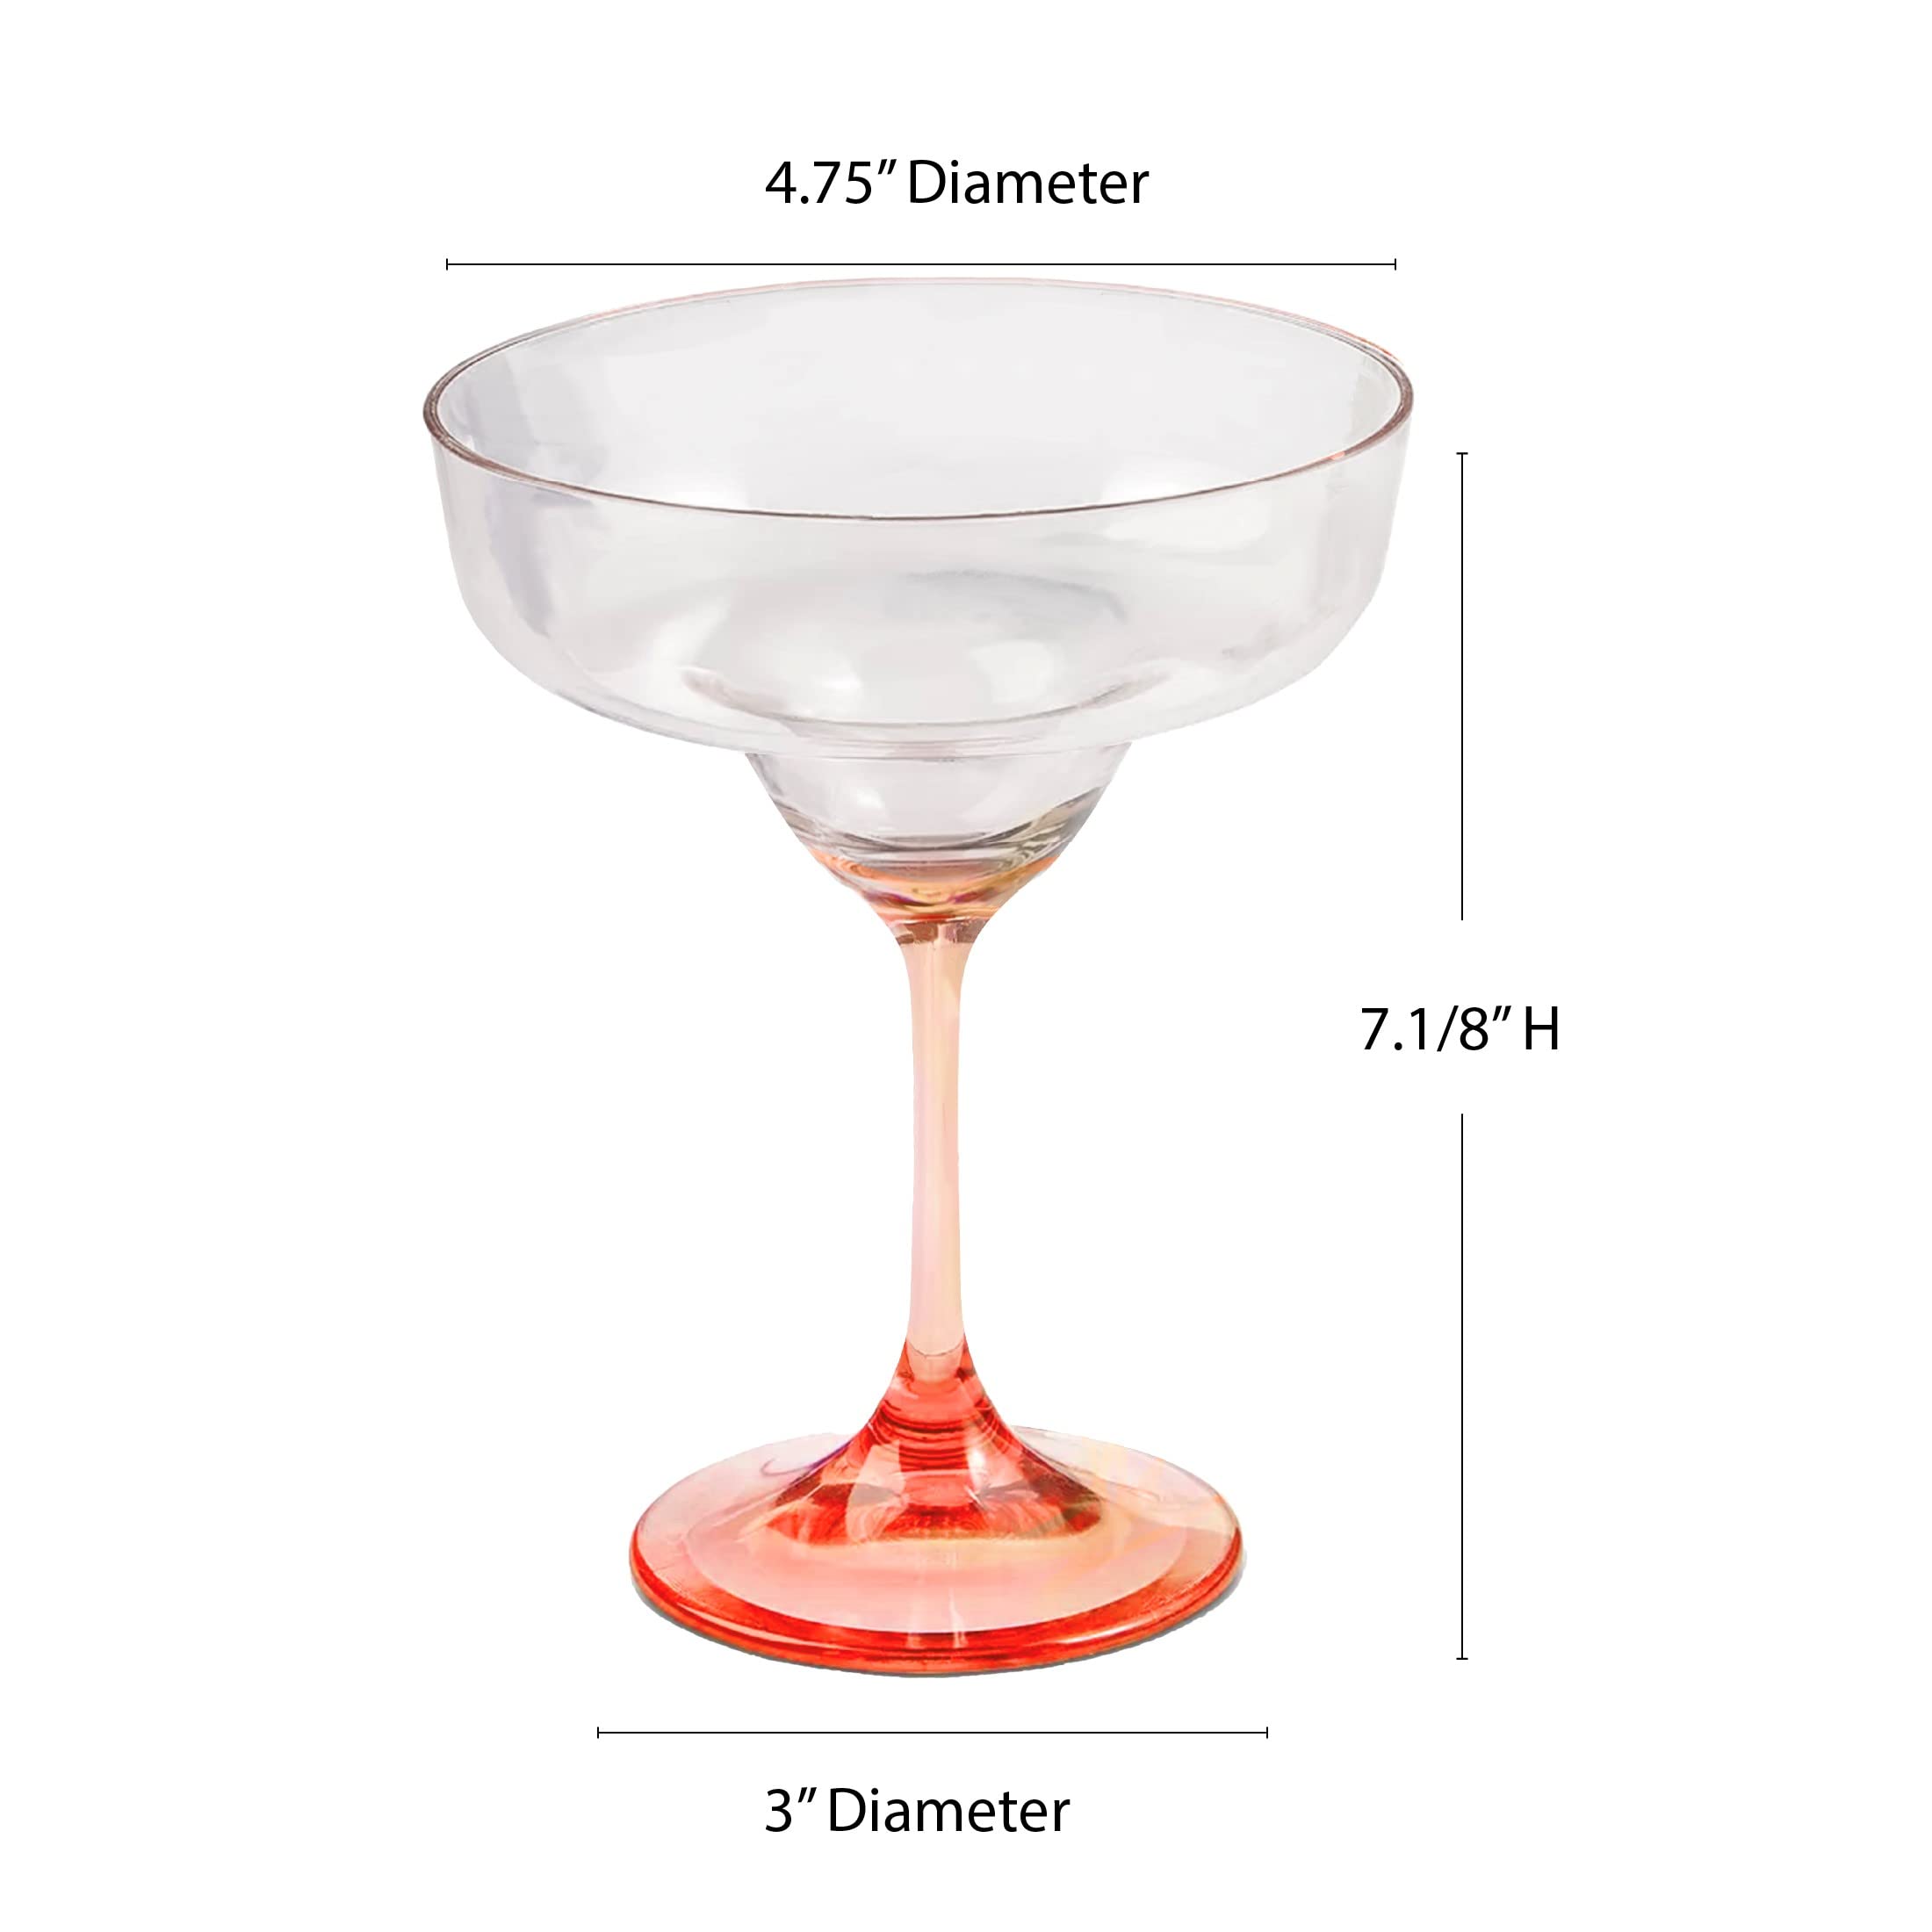 Lily's Home Unbreakable Plastic Margarita Glasses with Colored Stem. Made of Shatterproof Polycarbonate Plastic and Ideal for Indoor and Outdoor Use, Reusable (10 oz. Each, Set of 4)